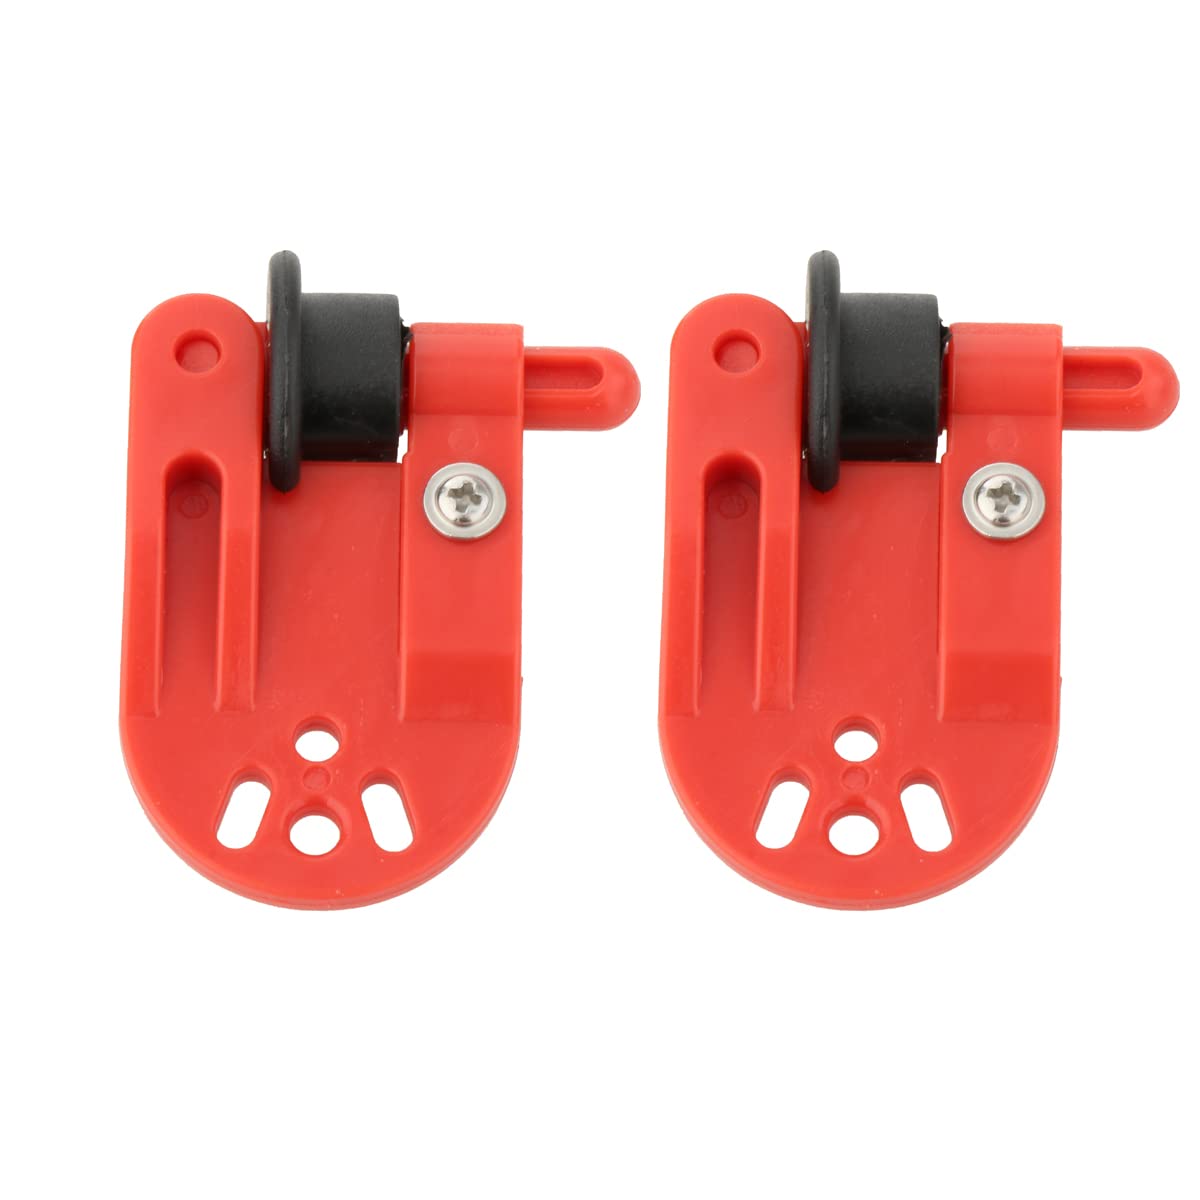 2 Pieces Planer Board Zams pro Release Clips Fishing In-line Side Clip for Offshore  Fishing